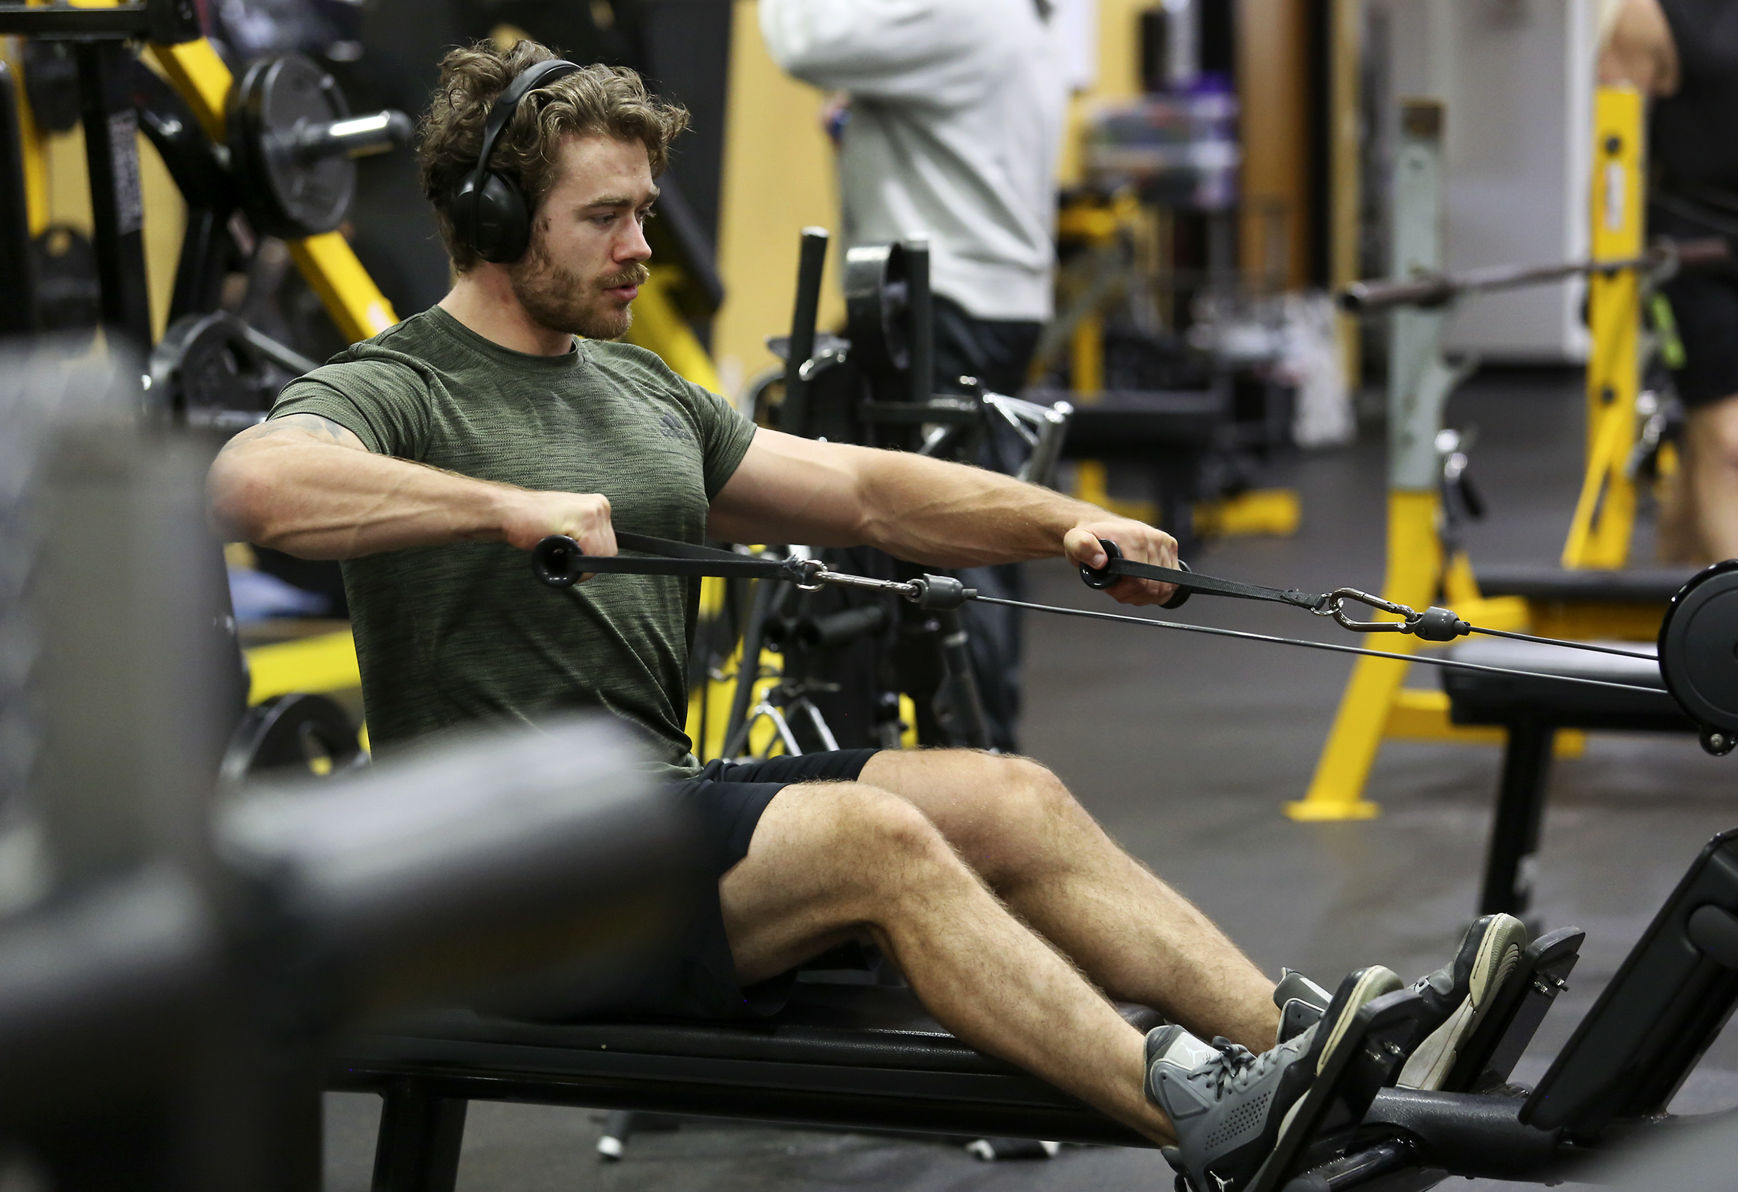 Colten Weinberger, of Dubuque, exercises at Signature Health & Fitness in Dubuque on Friday, Nov. 20, 2020. PHOTO CREDIT: NICKI KOHL